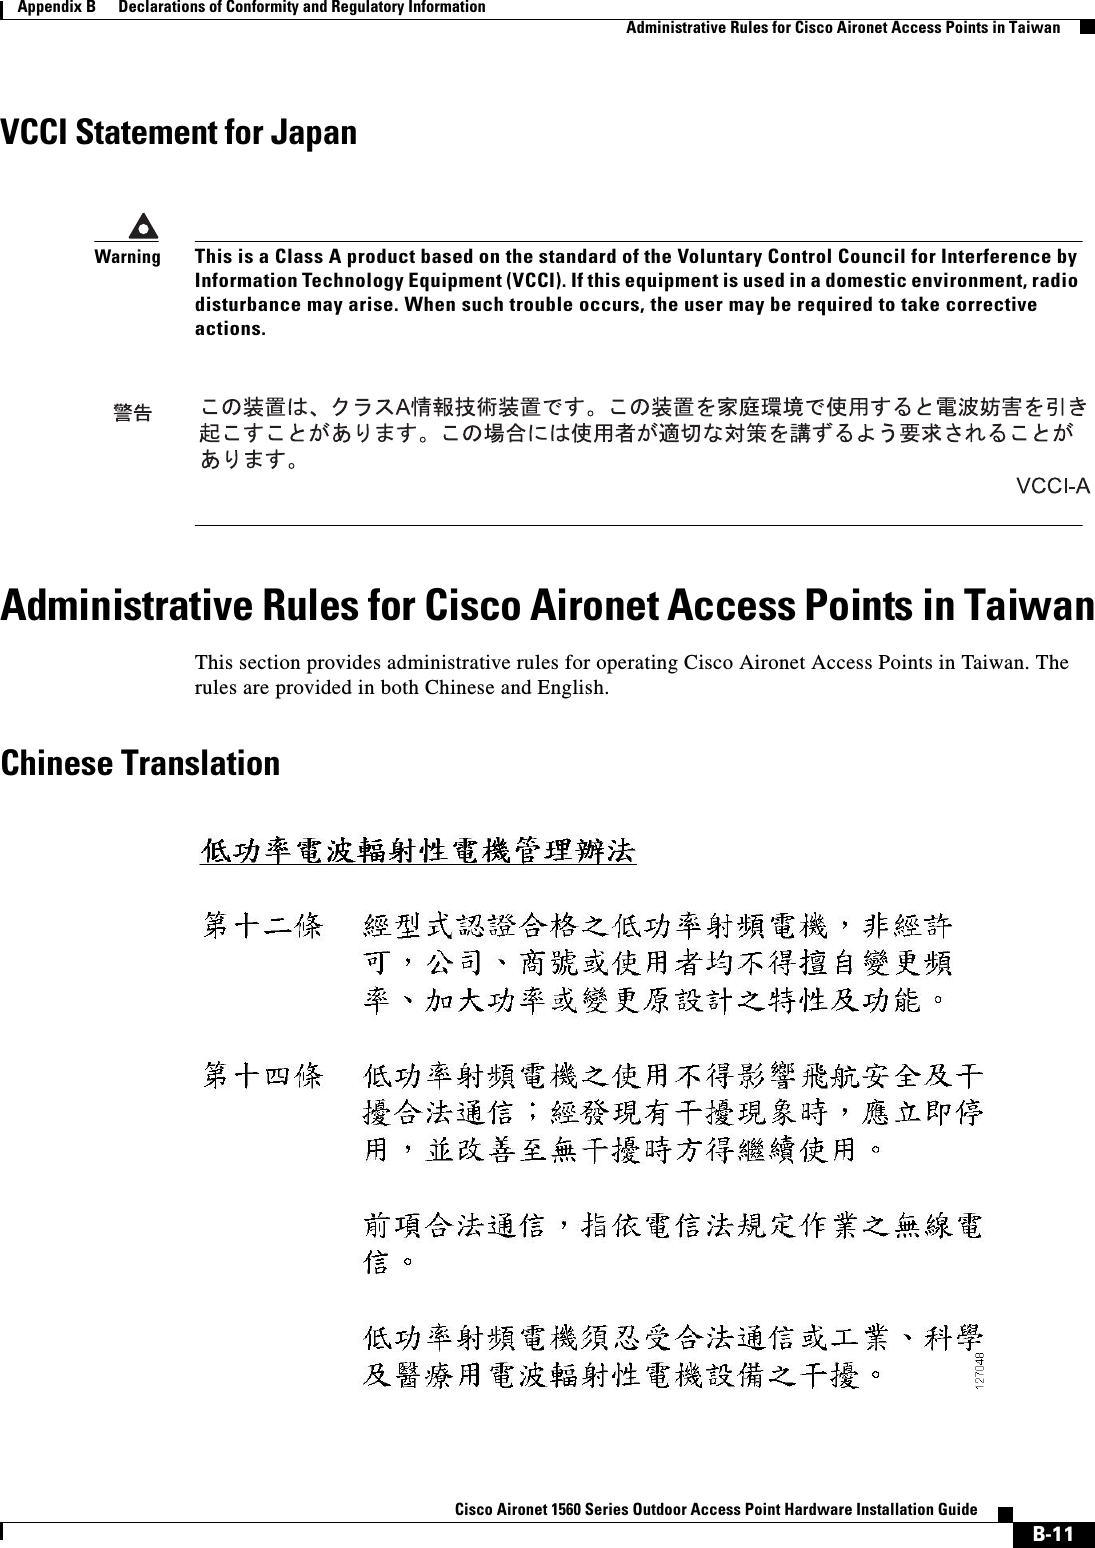  B-11Cisco Aironet 1560 Series Outdoor Access Point Hardware Installation Guide Appendix B      Declarations of Conformity and Regulatory InformationAdministrative Rules for Cisco Aironet Access Points in TaiwanVCCI Statement for JapanAdministrative Rules for Cisco Aironet Access Points in TaiwanThis section provides administrative rules for operating Cisco Aironet Access Points in Taiwan. The rules are provided in both Chinese and English.Chinese TranslationWarningThis is a Class A product based on the standard of the Voluntary Control Council for Interference by Information Technology Equipment (VCCI). If this equipment is used in a domestic environment, radio disturbance may arise. When such trouble occurs, the user may be required to take corrective actions.